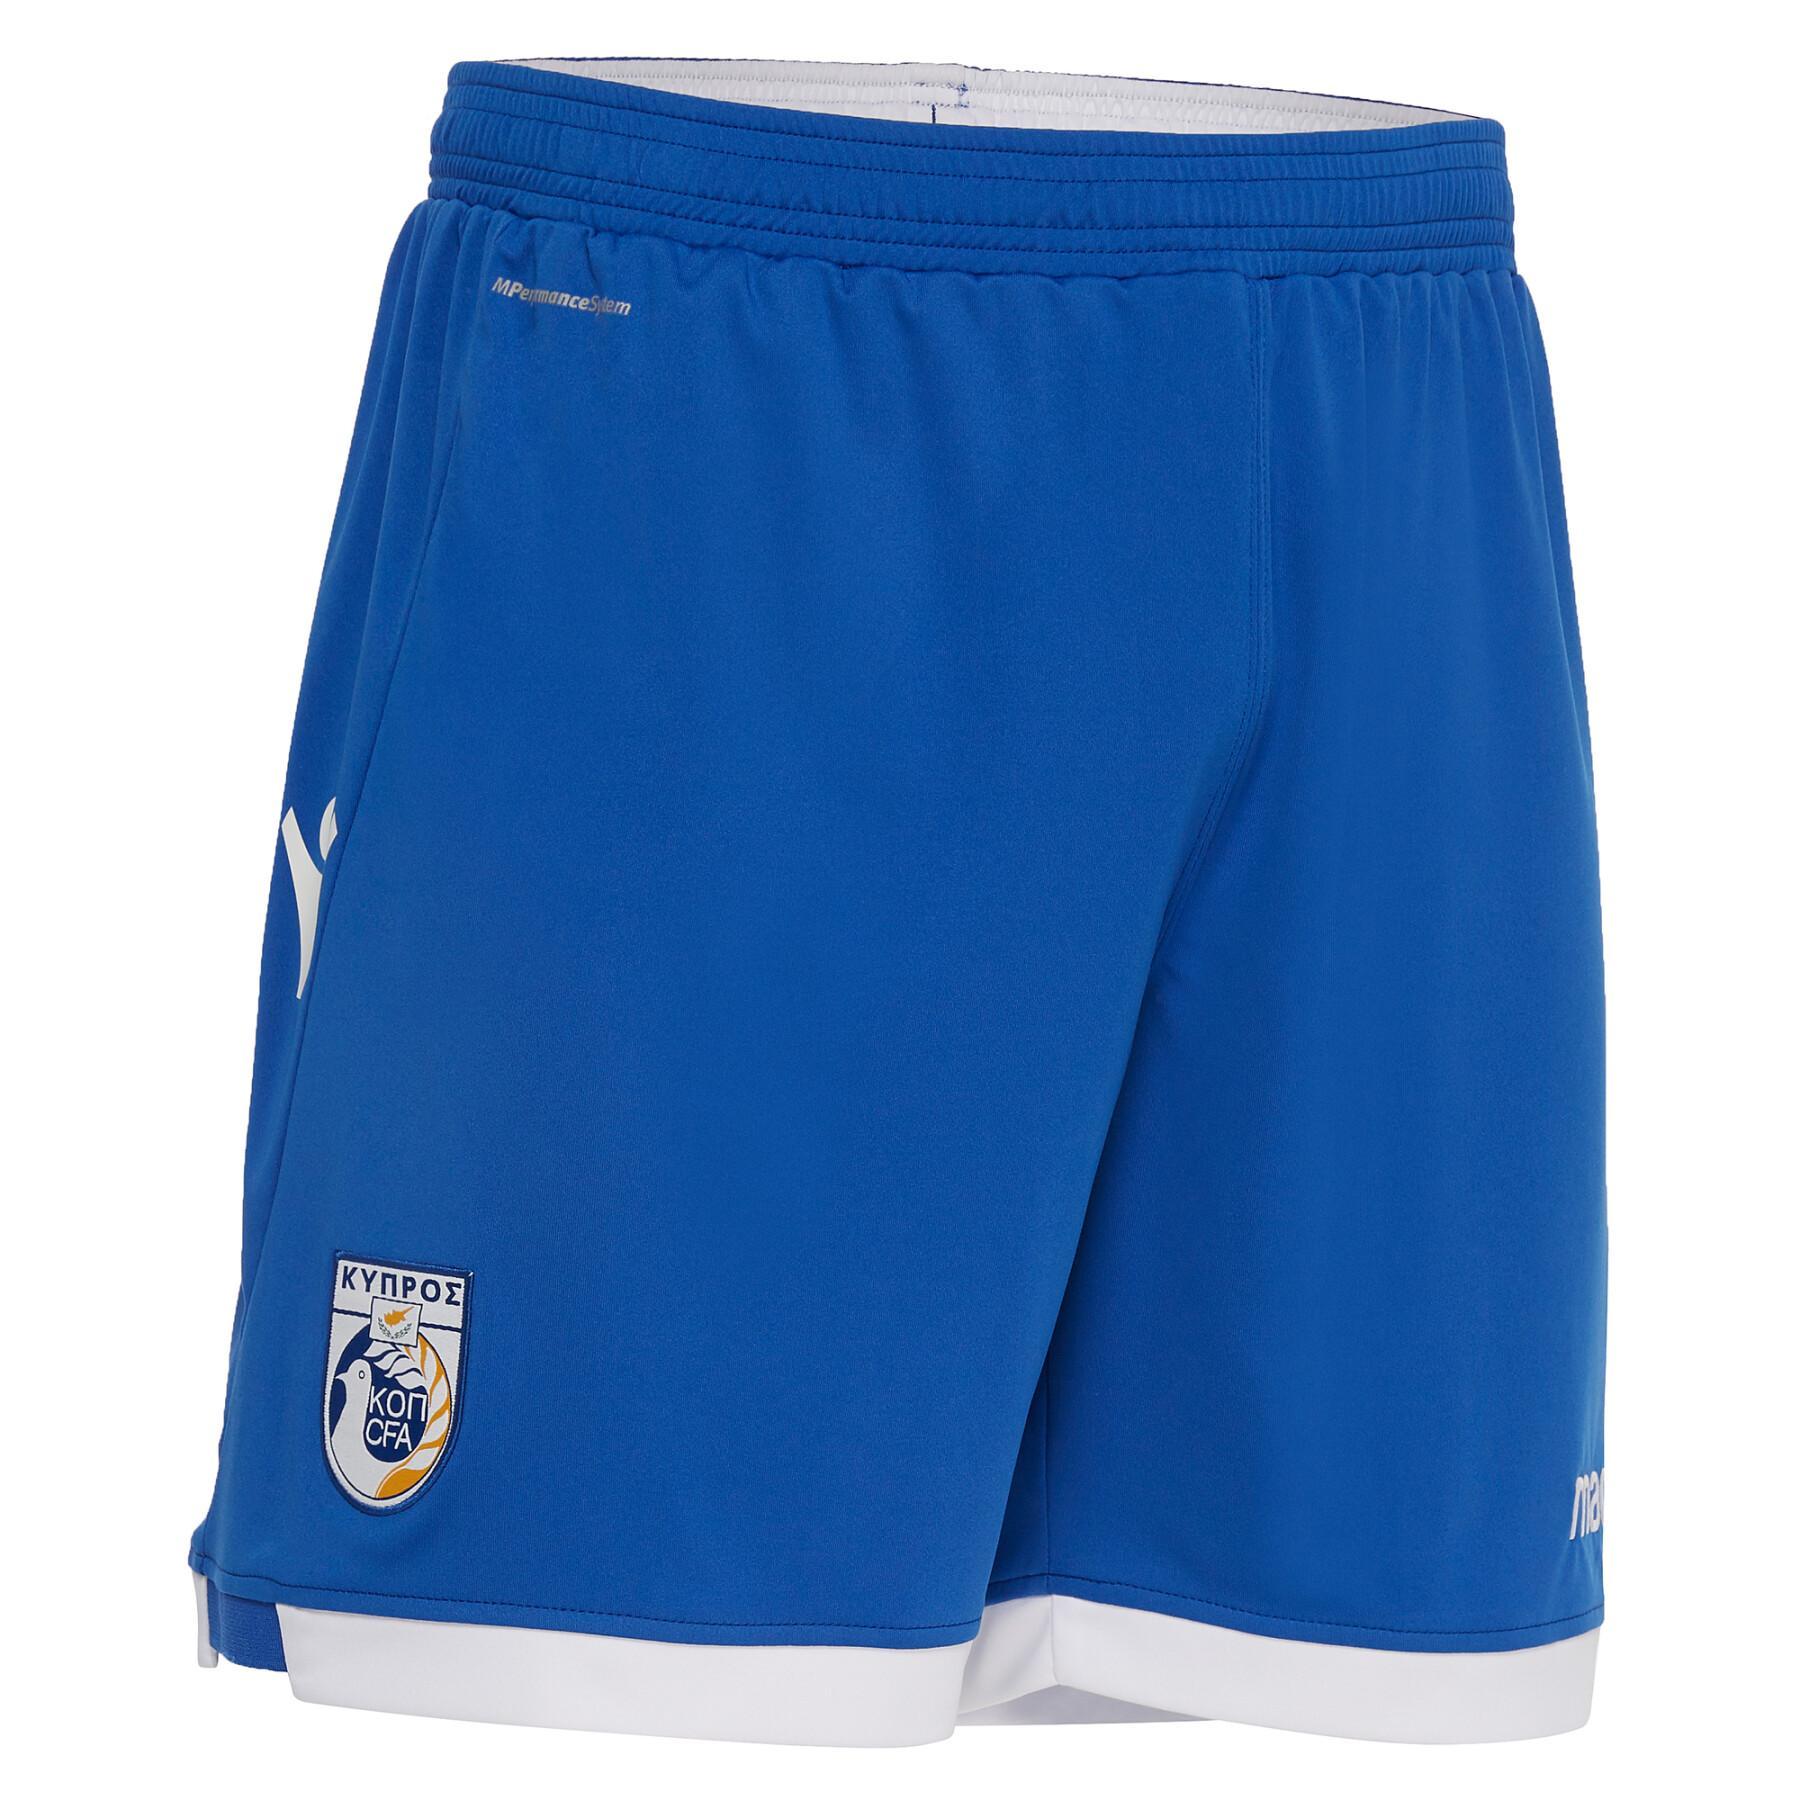 Home shorts Chypre 18/19